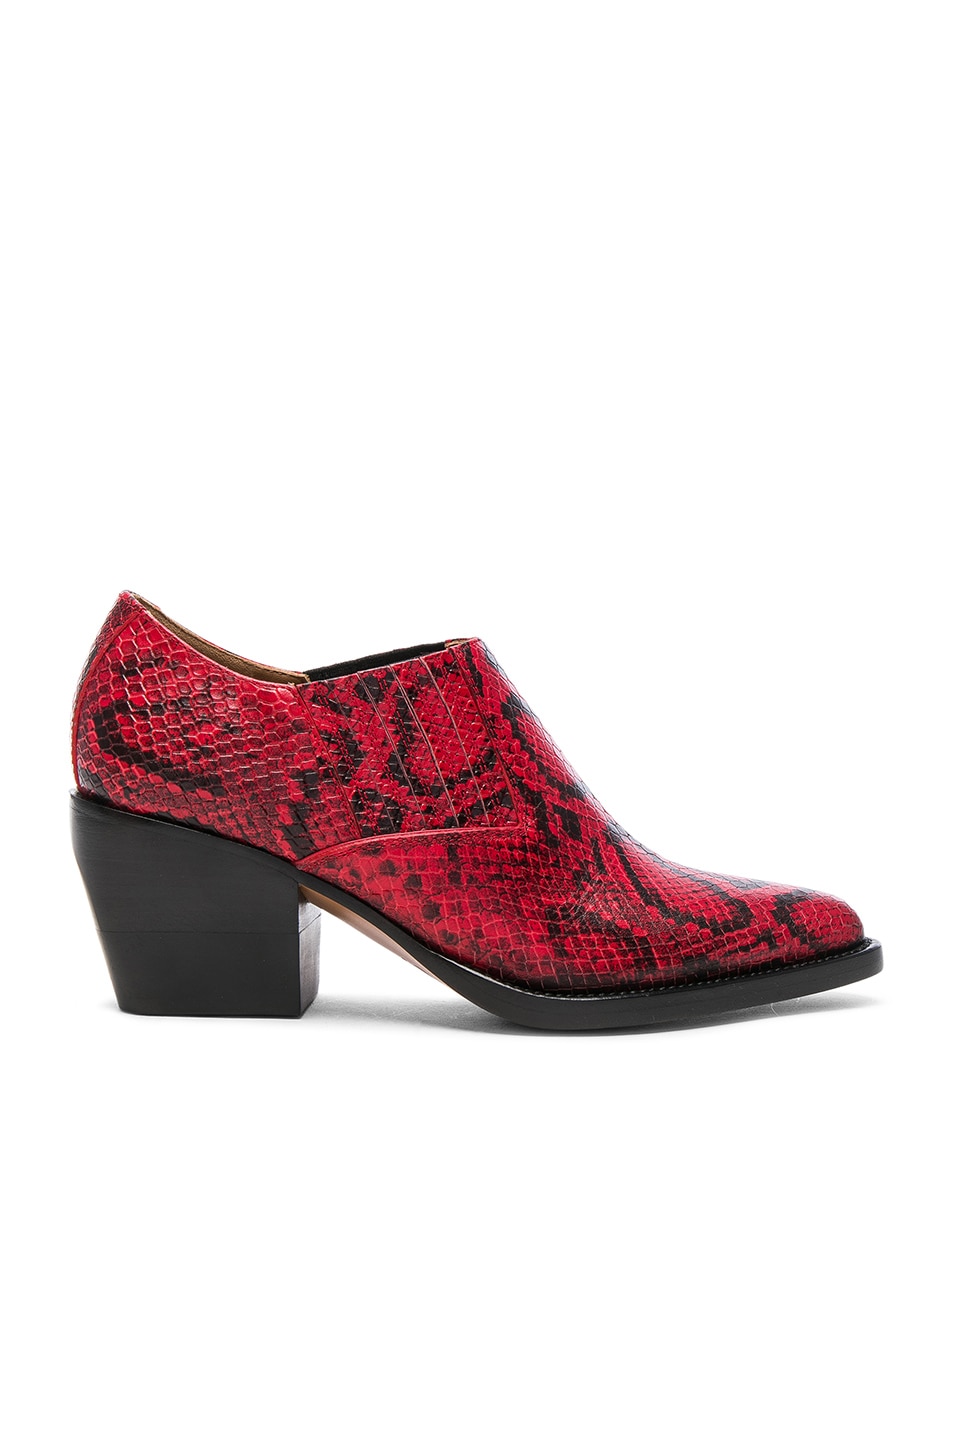 Image 1 of Chloe Rylee Python Print Leather Ankle Boots in Gypsy Red